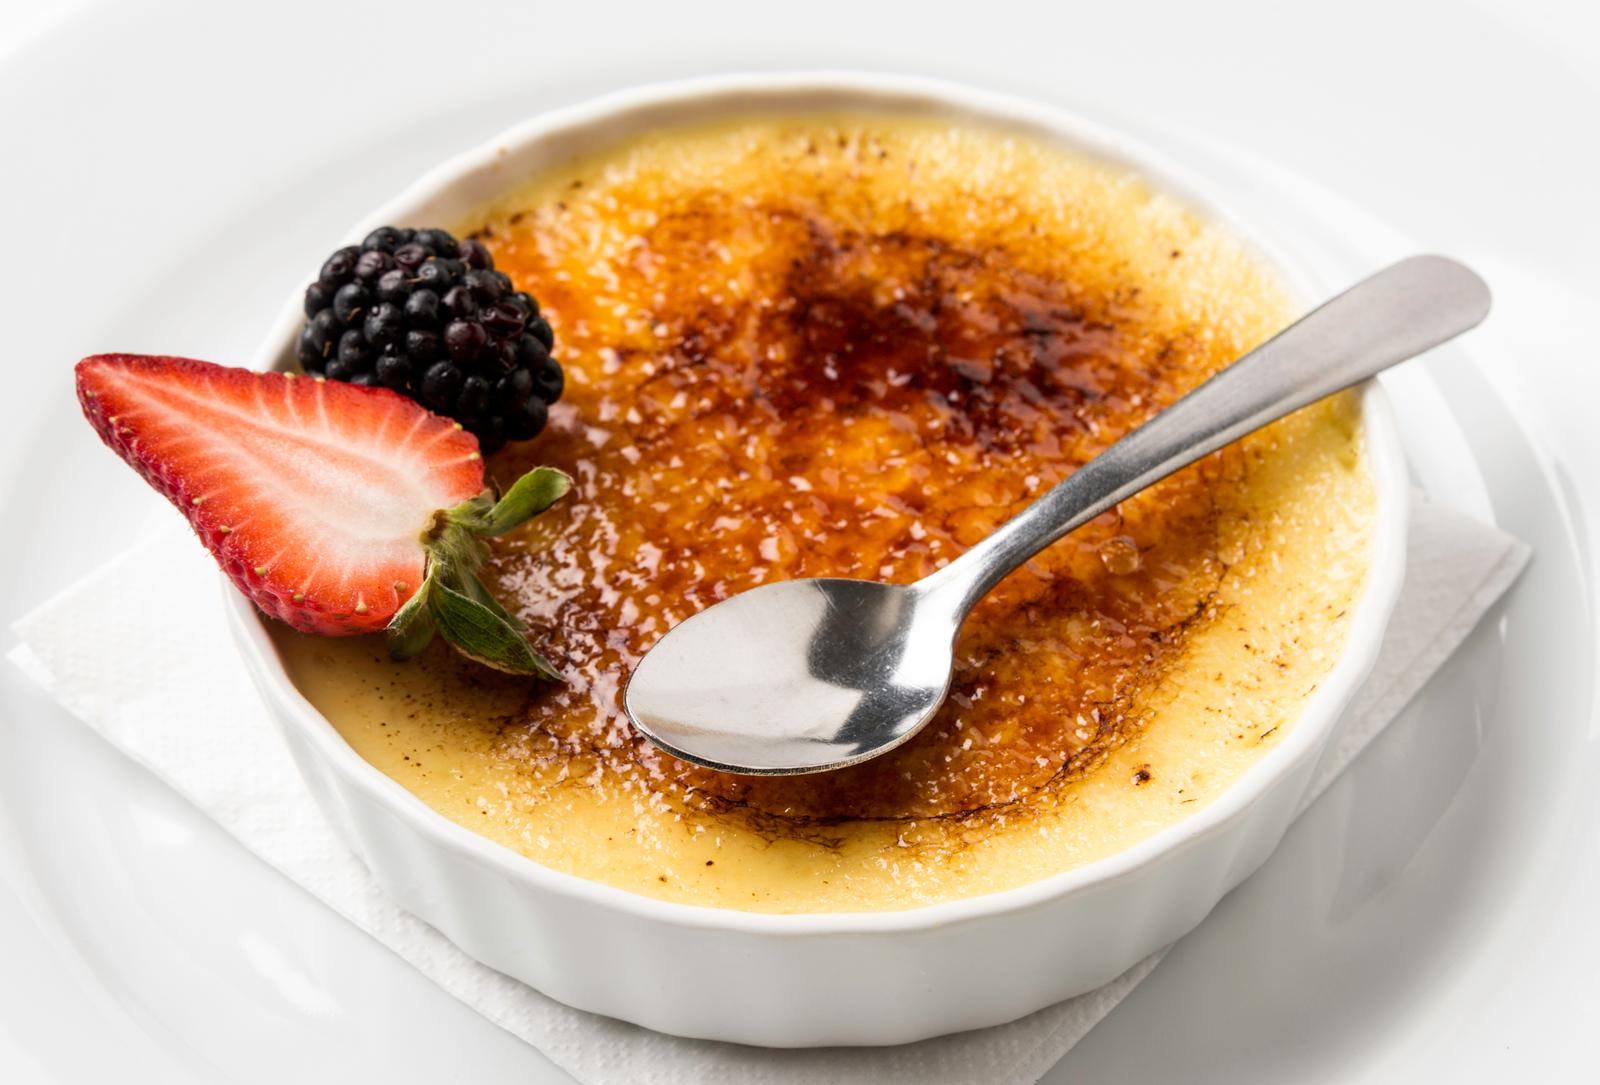 This Picture Quiz Will Challenge Your Knowledge of Classic French Desserts 🥐 – Can You Score High? Creme brulee